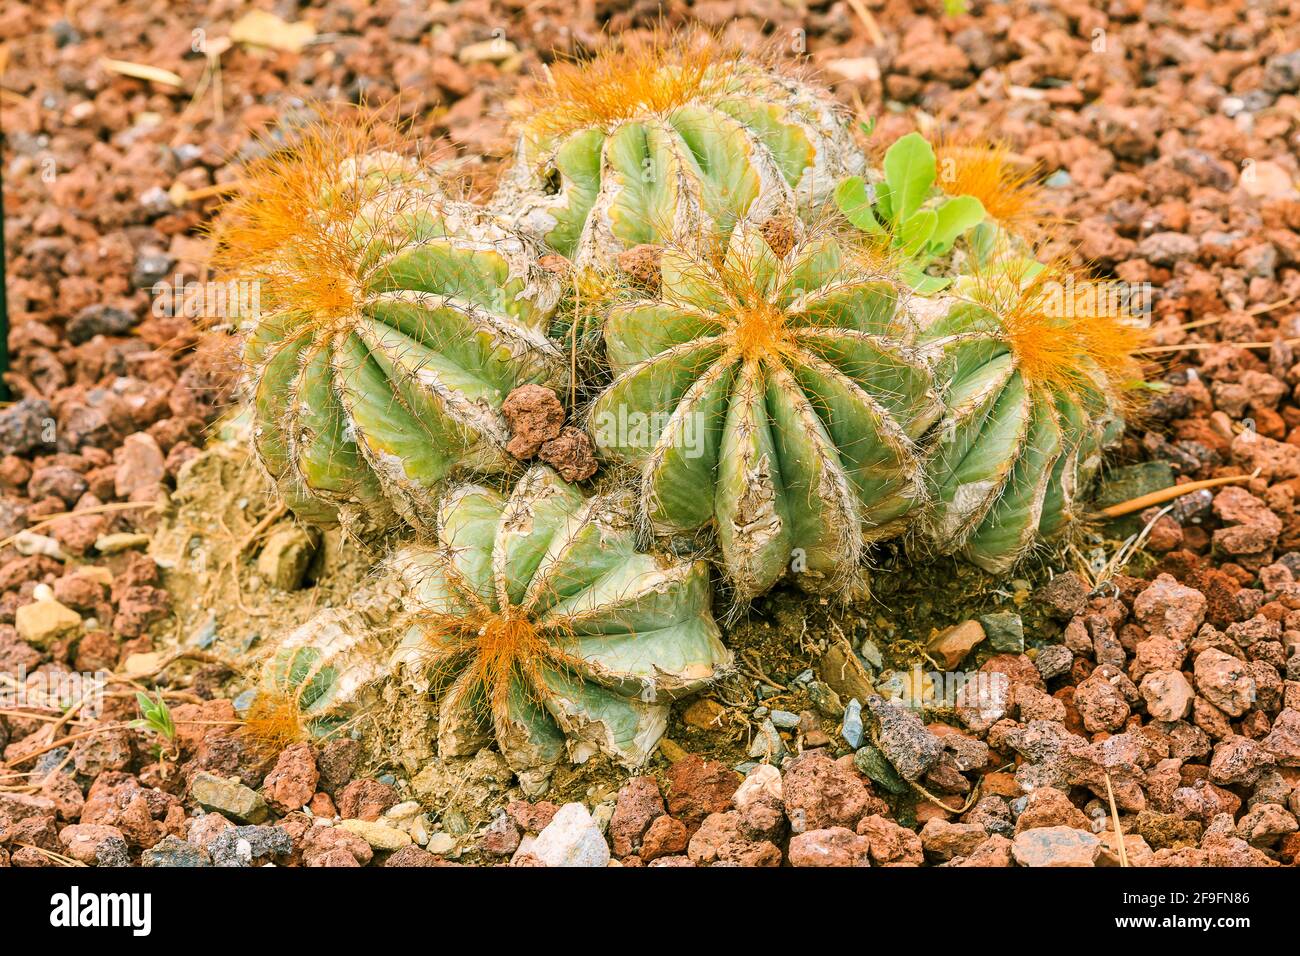 Cactus plant Parodia magnifica from Brazil in autumn with yellow spines. Planted in the botanical garden on stony ground Stock Photo